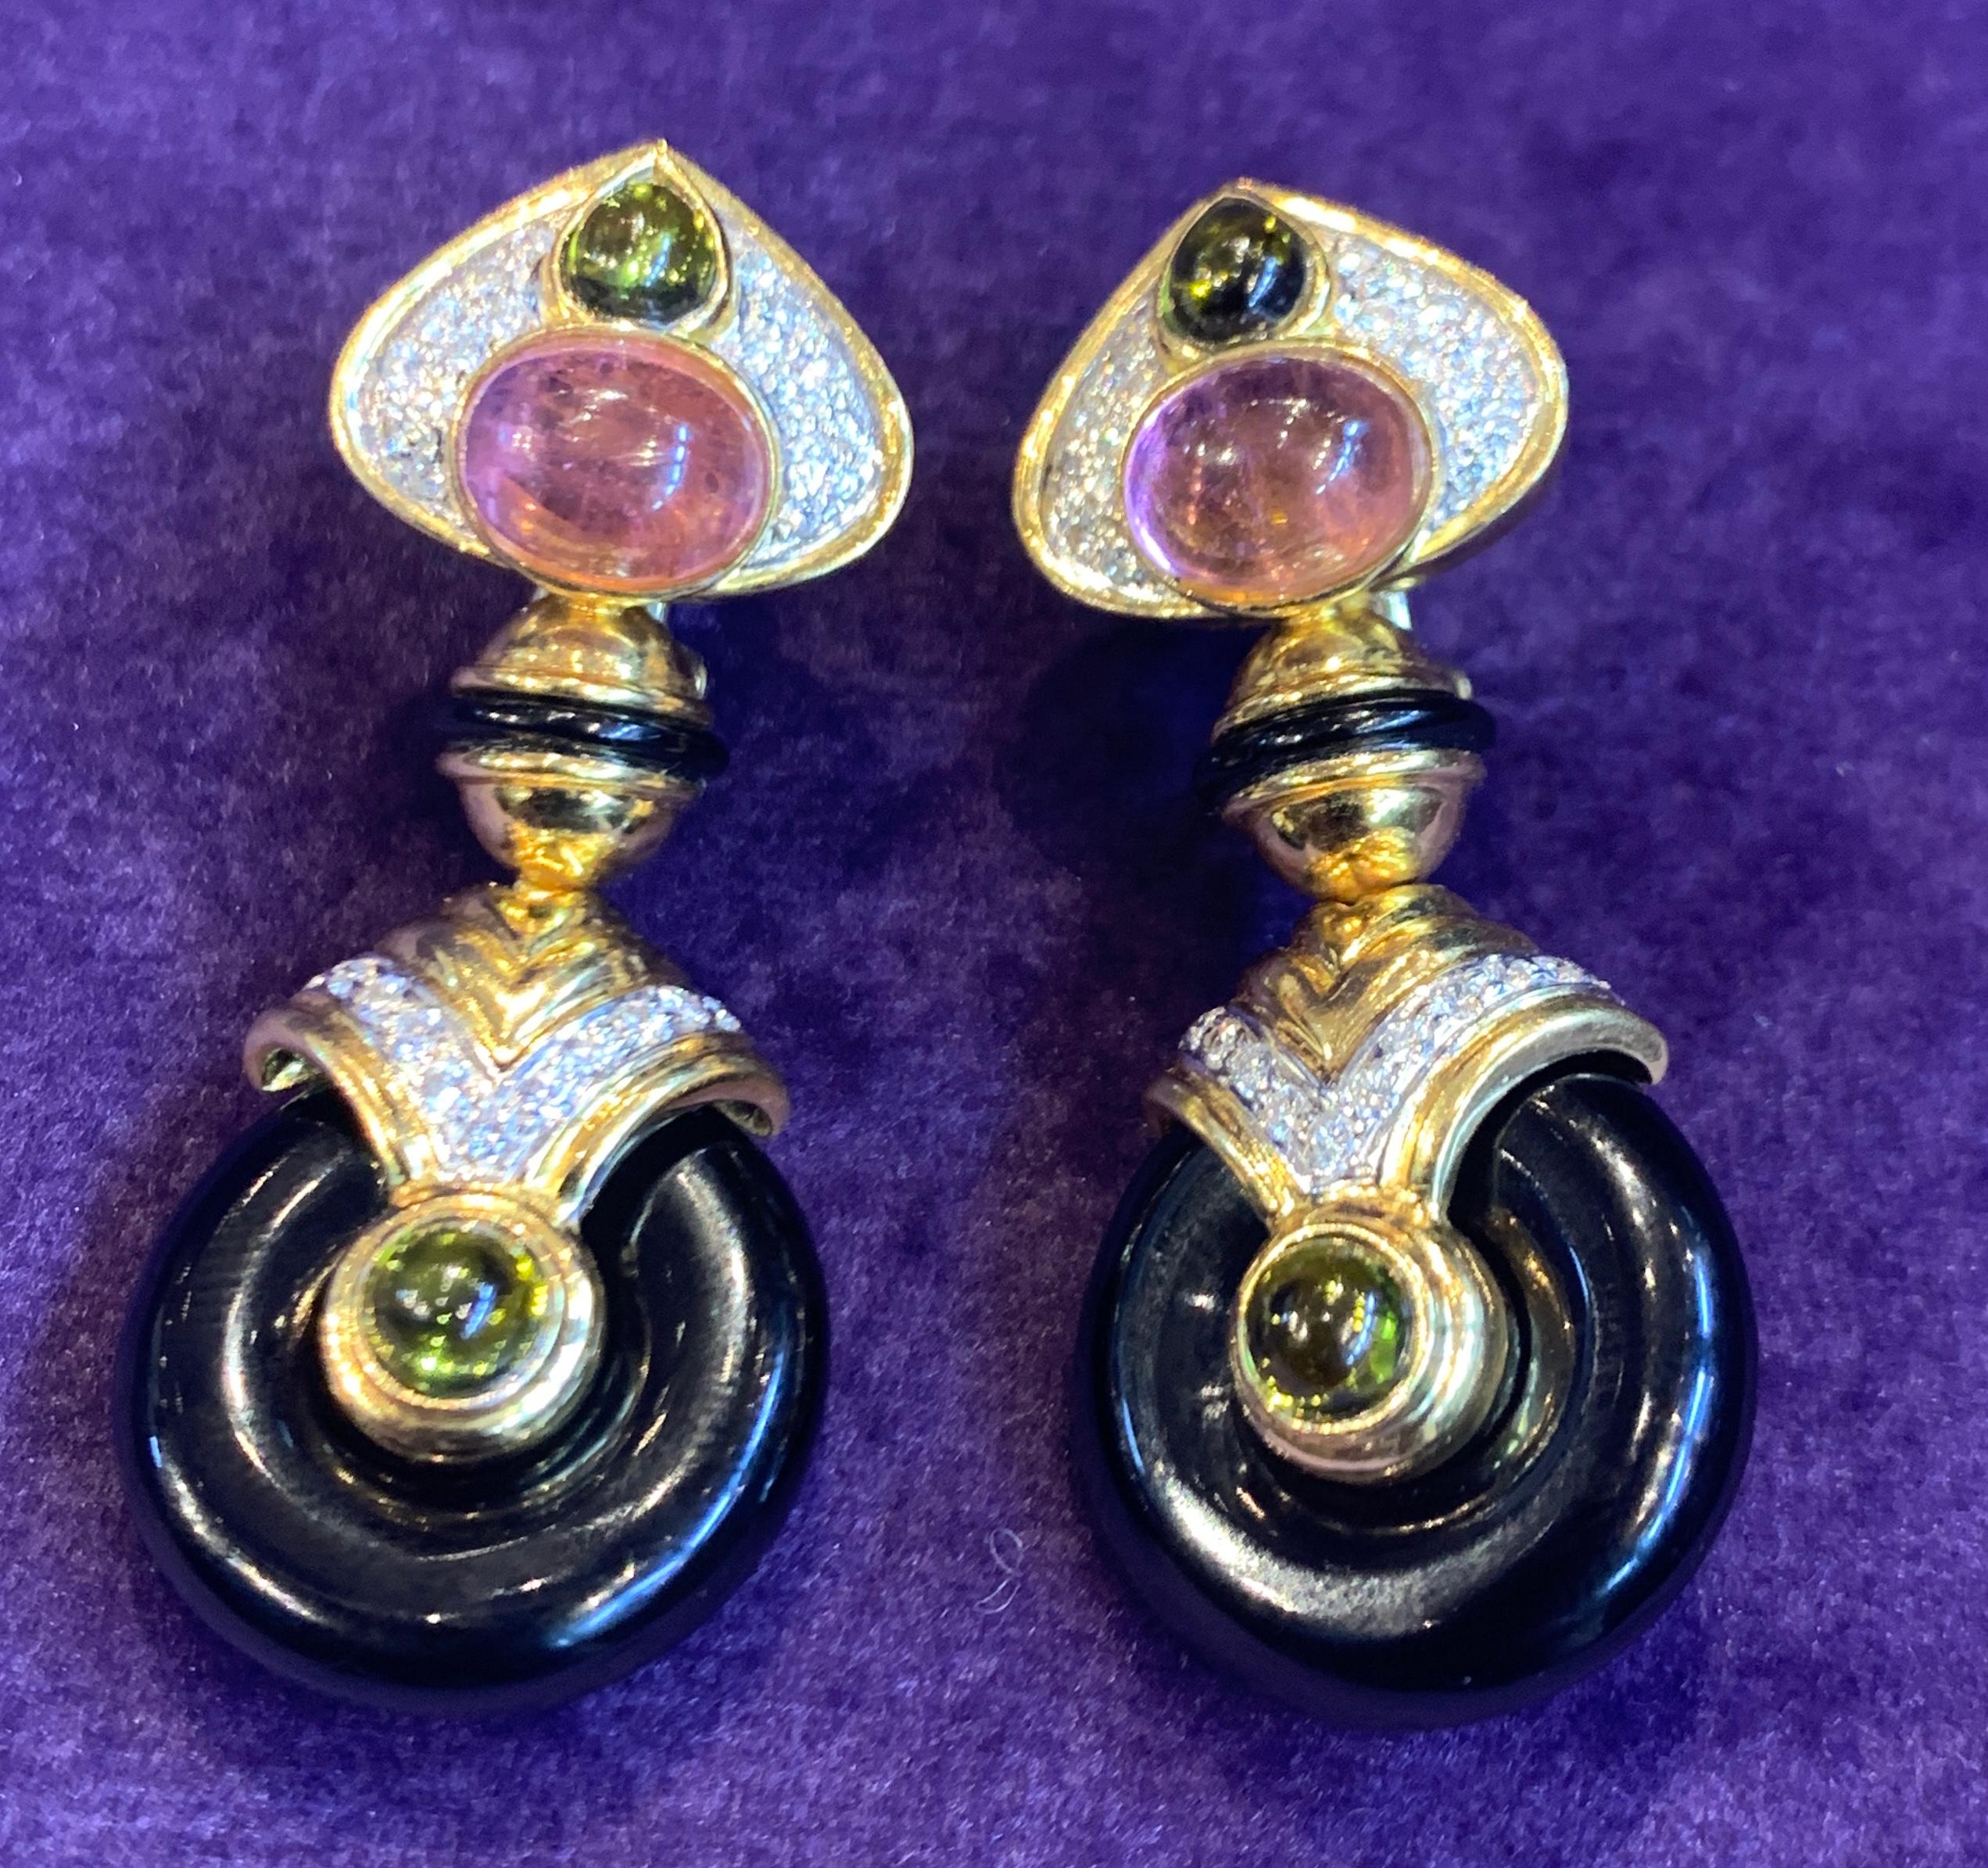 Multi Gem Gold Dangle Earrings with 4 changeable drops  including  amethyst , onyx, citrine & mother of pearl
Measurements: 1.75